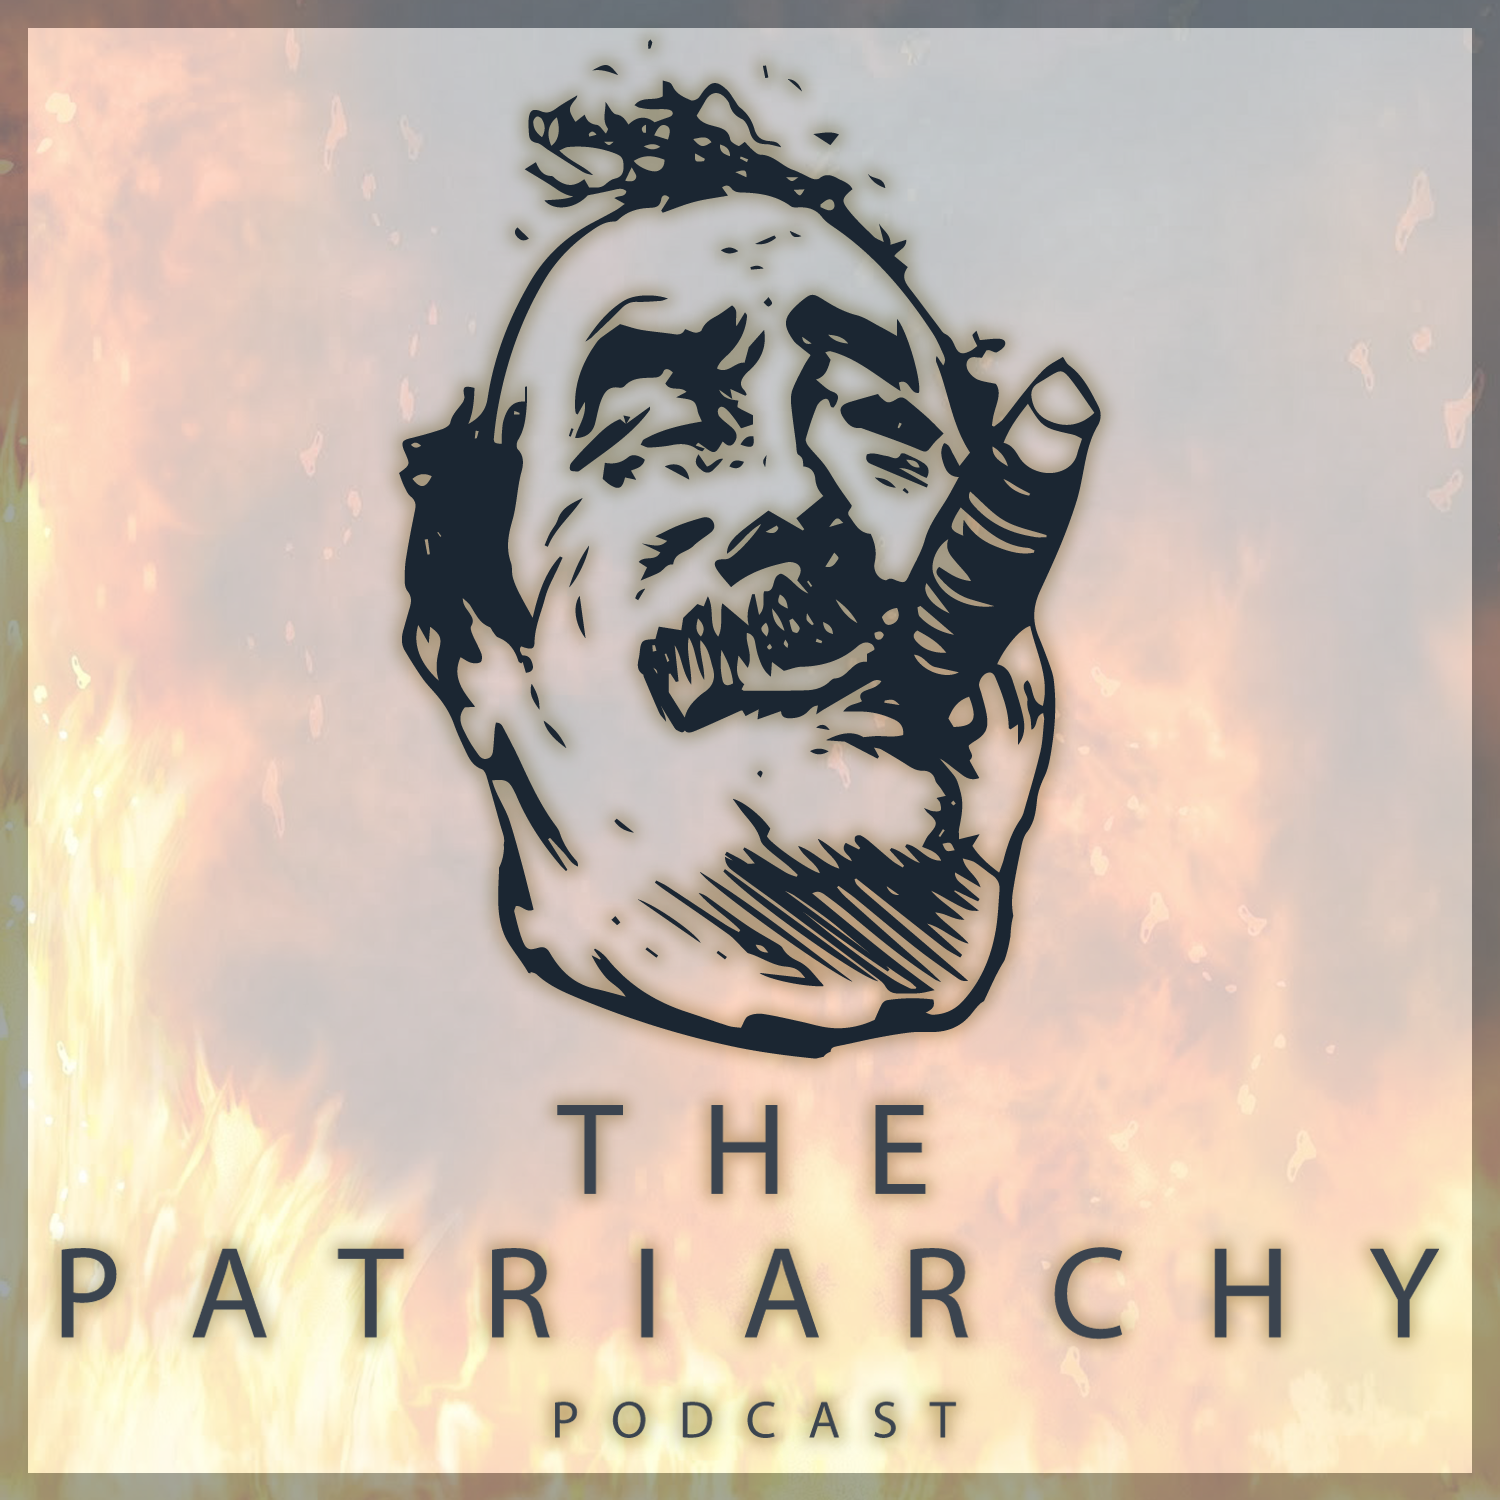 The Patriarchy Podcast: Bread & Circuses (Ep 27)